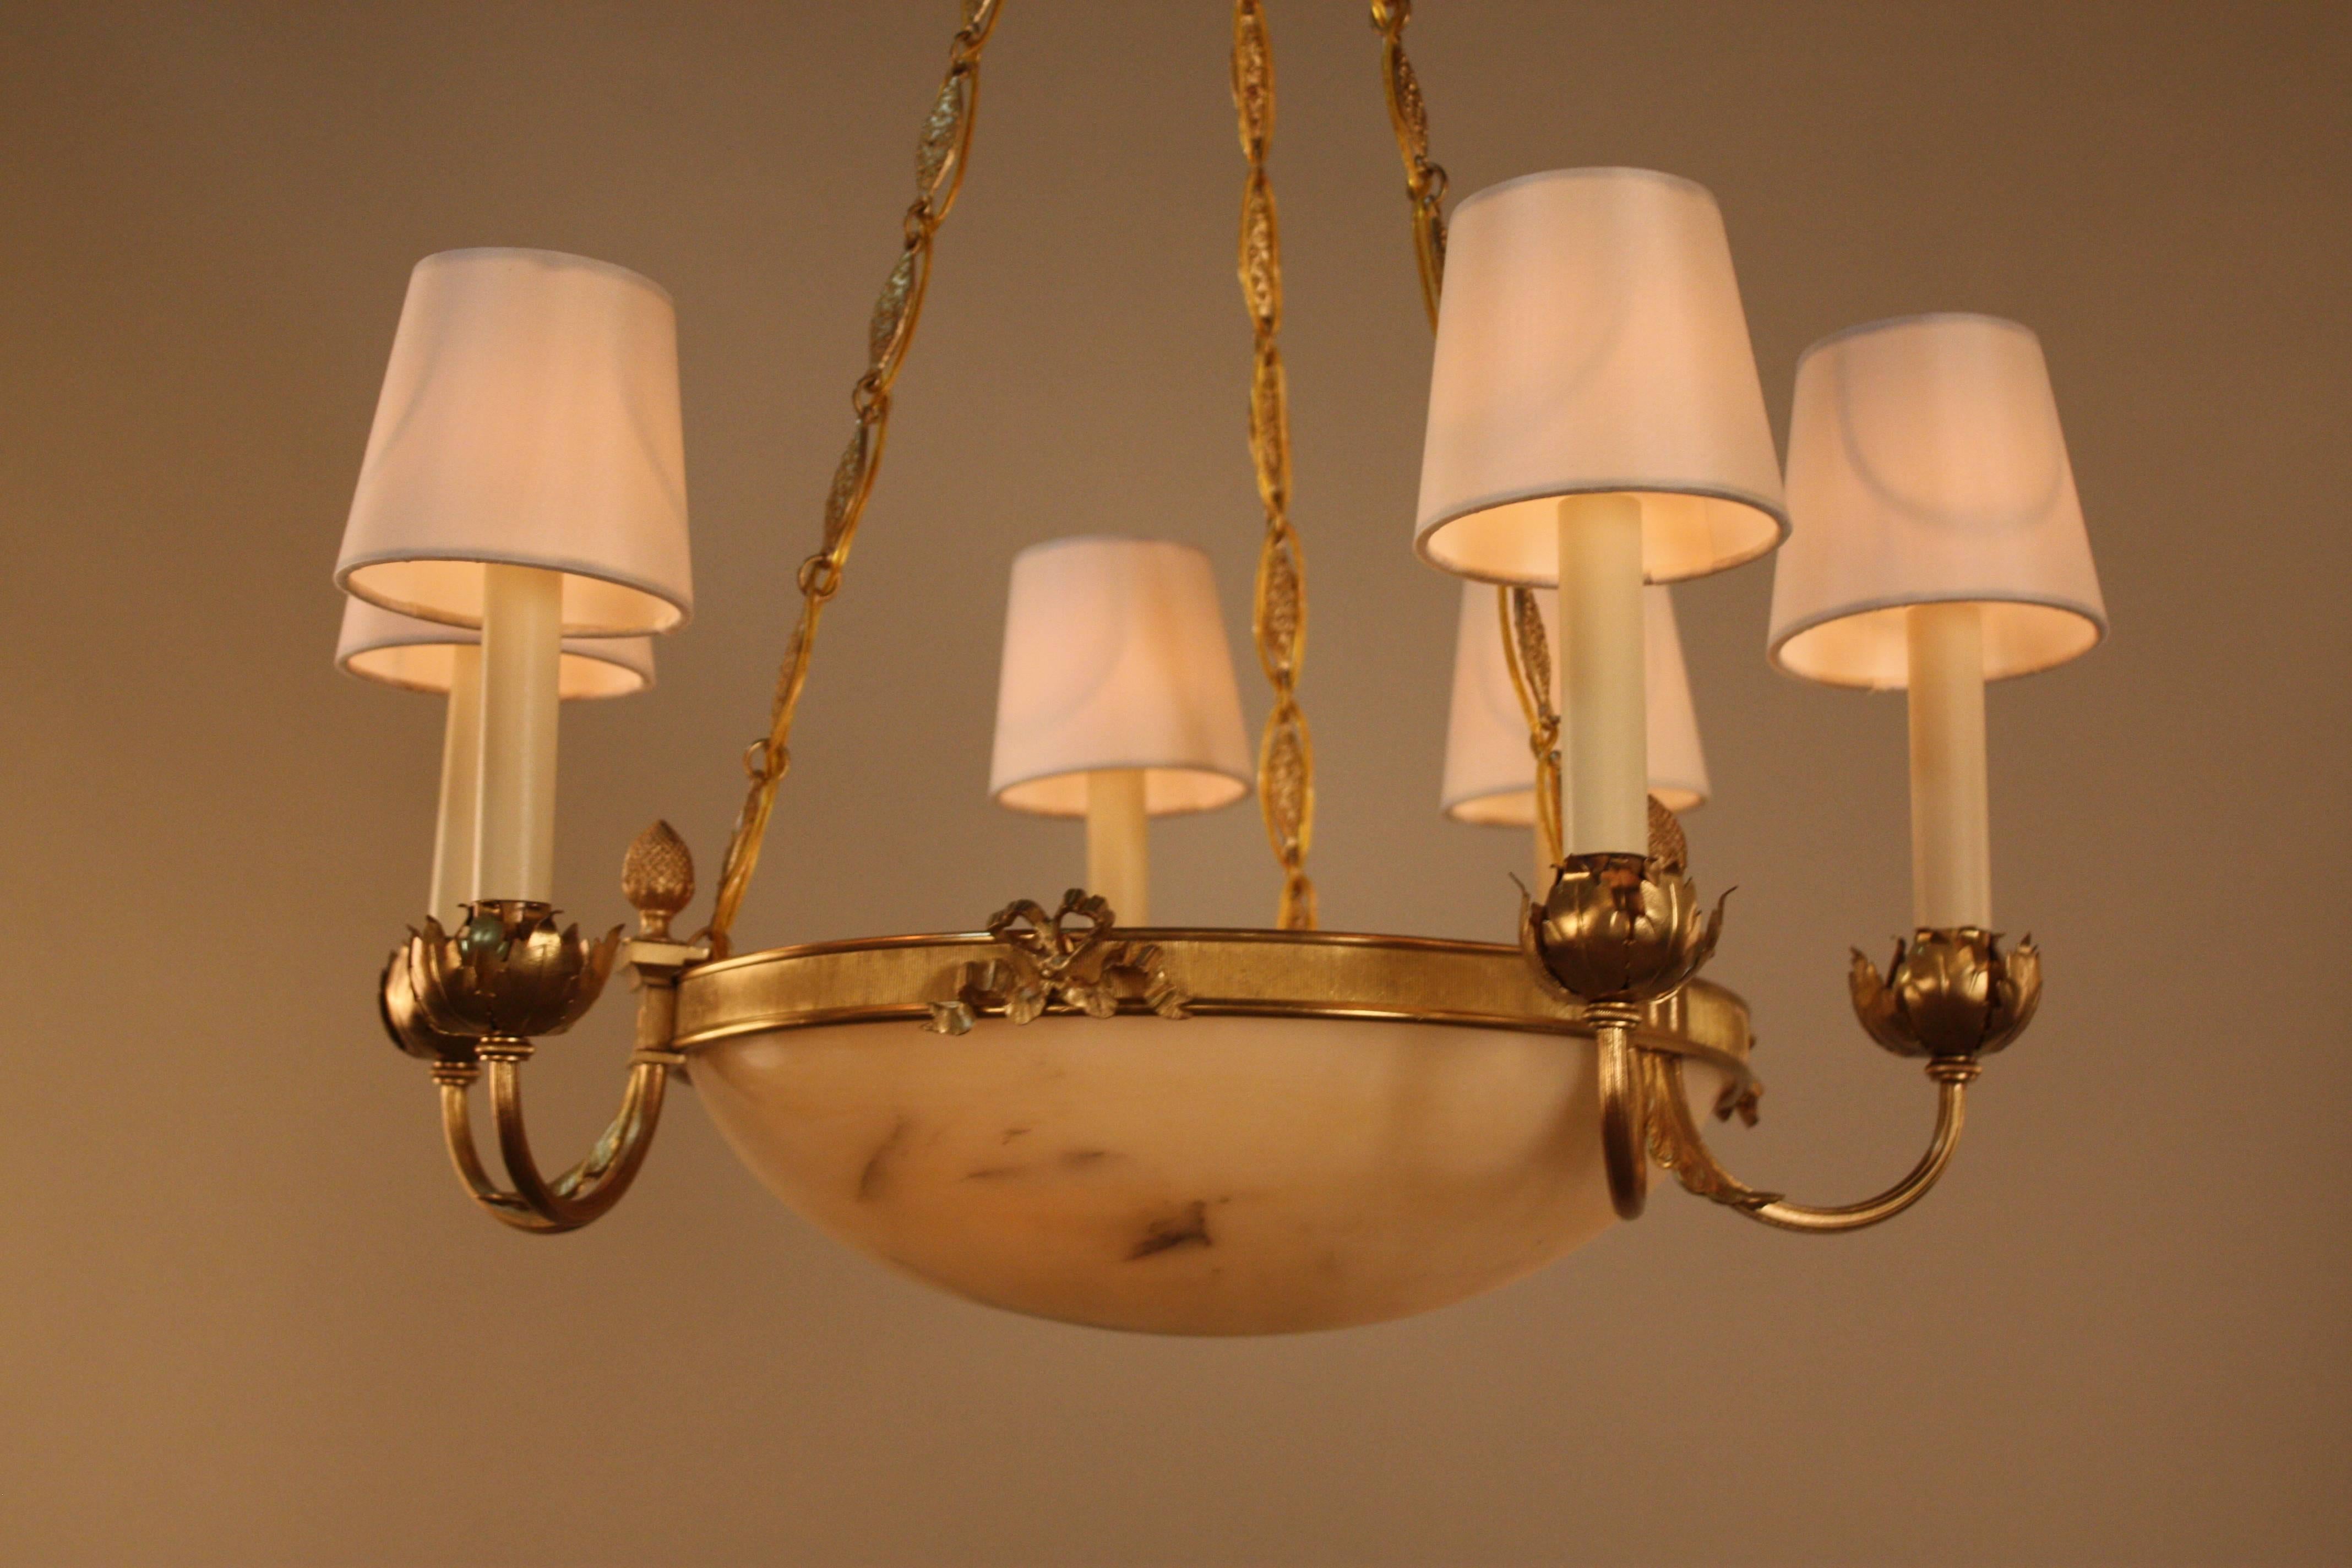 French 1930s bronze and alabaster chandelier.
Total of nine lights, 60 watts each.